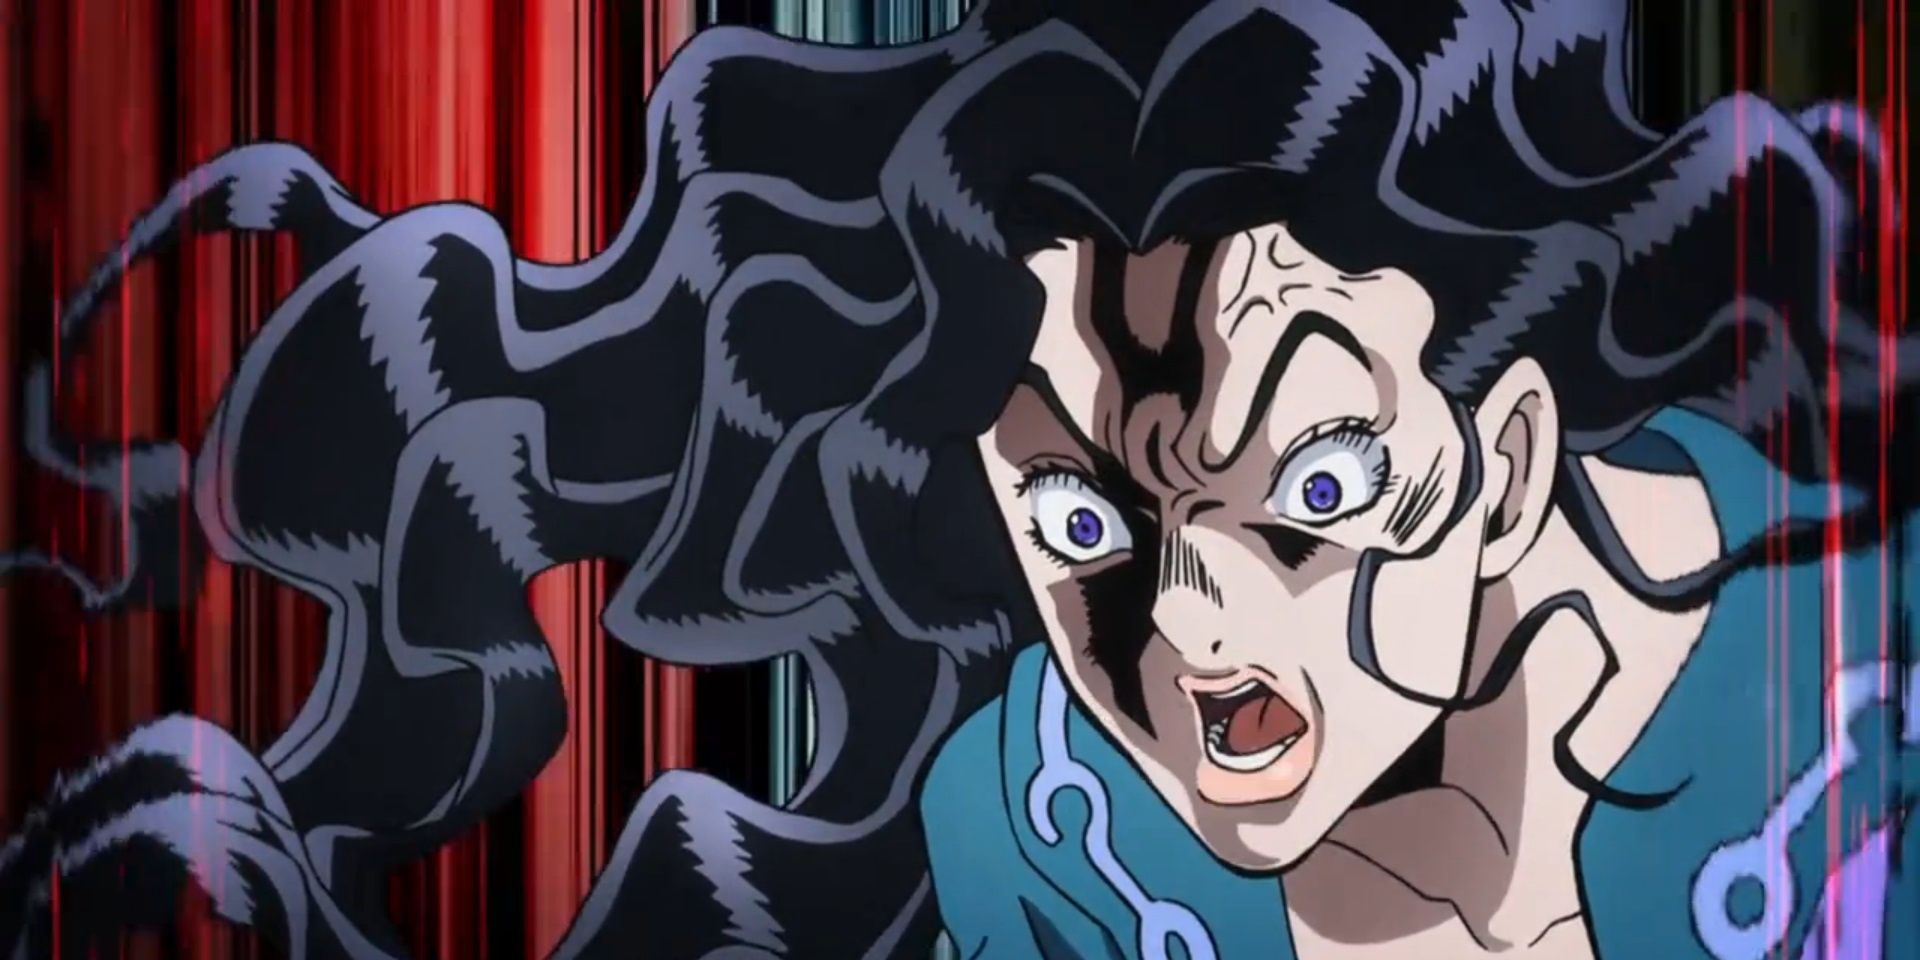 Yukako Yamigishi's Love Deluxe in Jojo's Bizarre Adventure; Yukako's hair is floating in a mass and her eyes are bugged, her mouth agape.